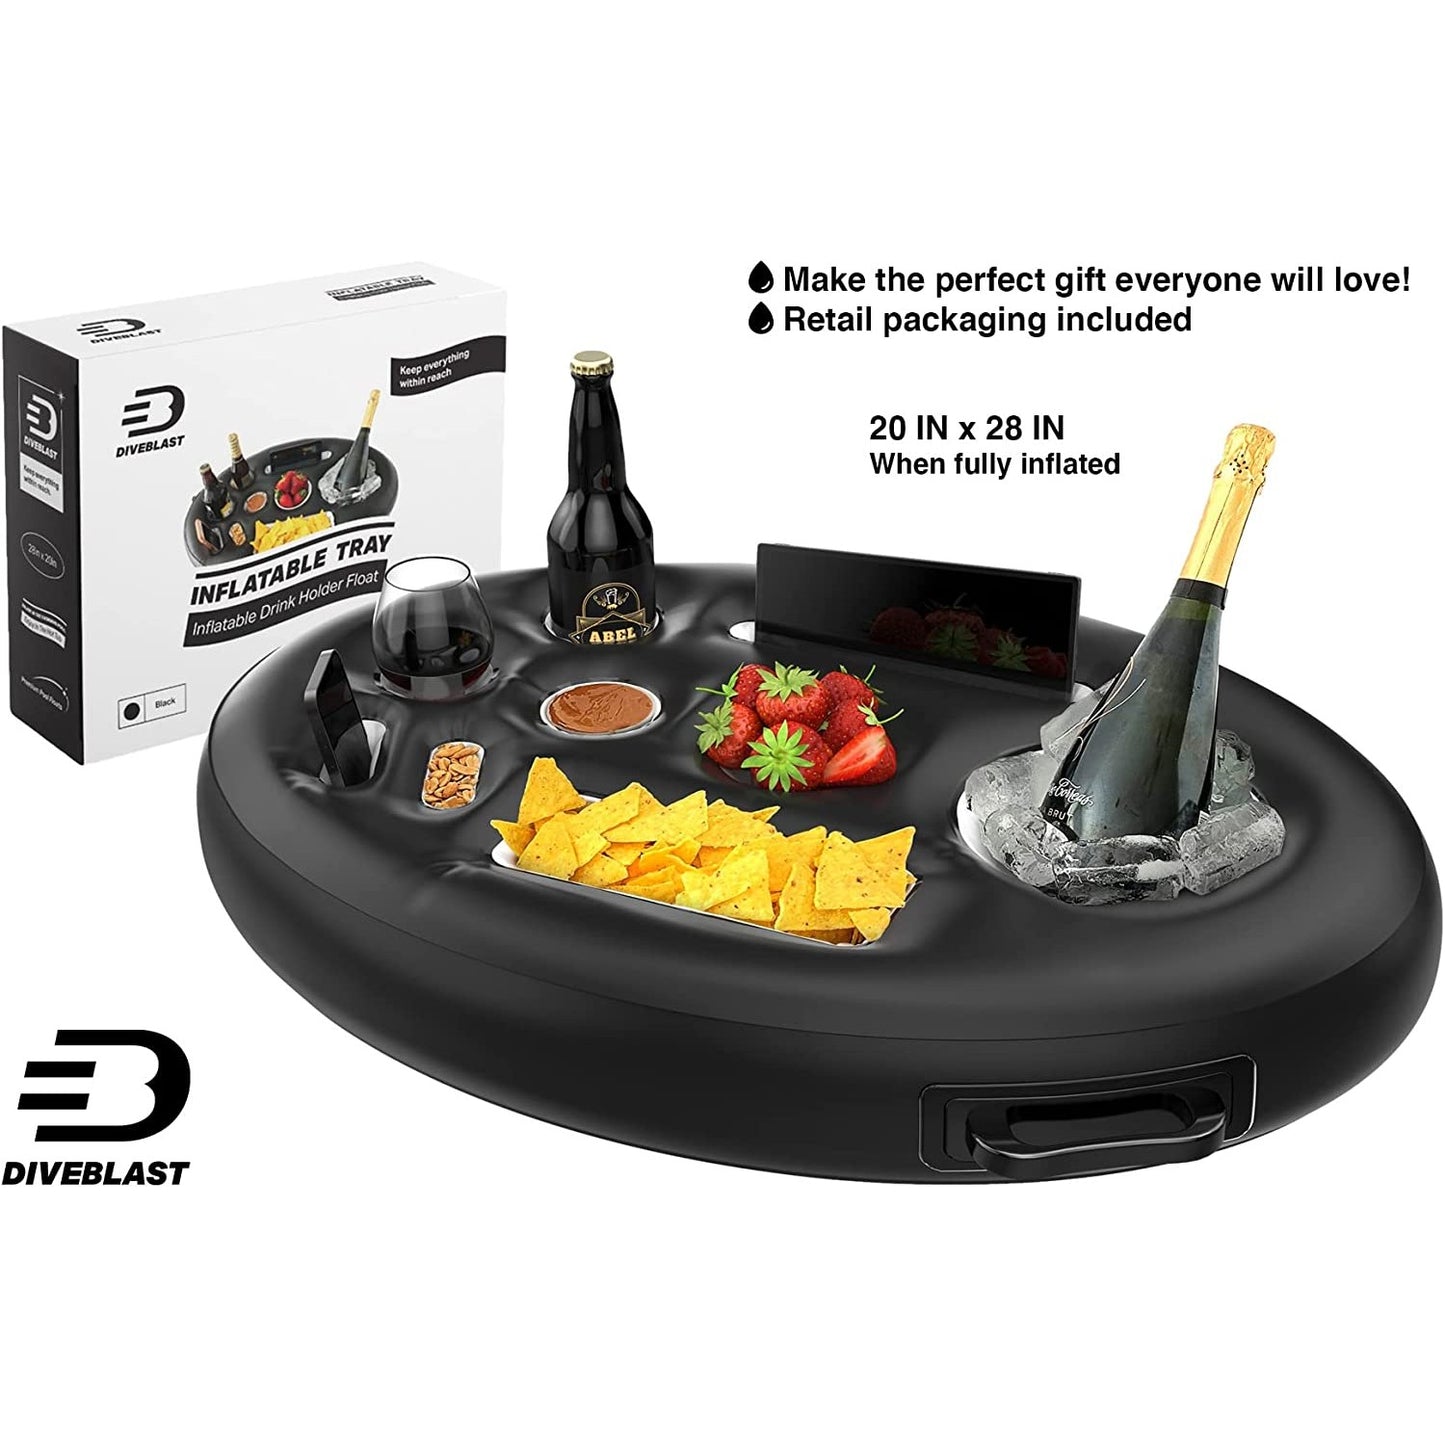 An inflatable black tray for holding food and drinks.